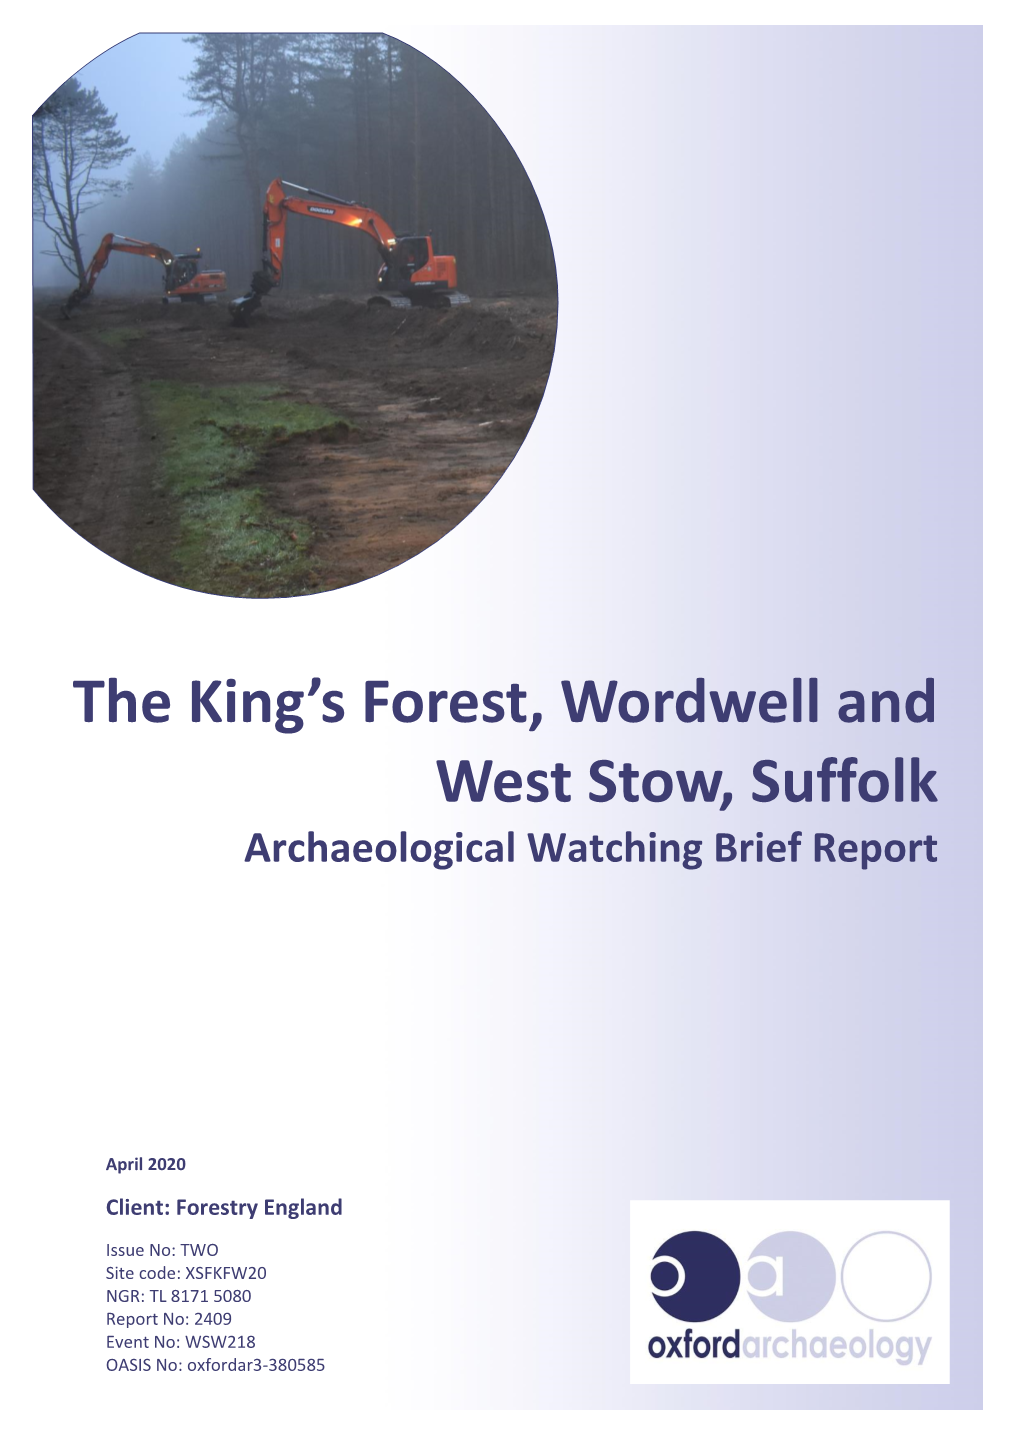 The King's Forest, Wordwell and West Stow, Suffolk